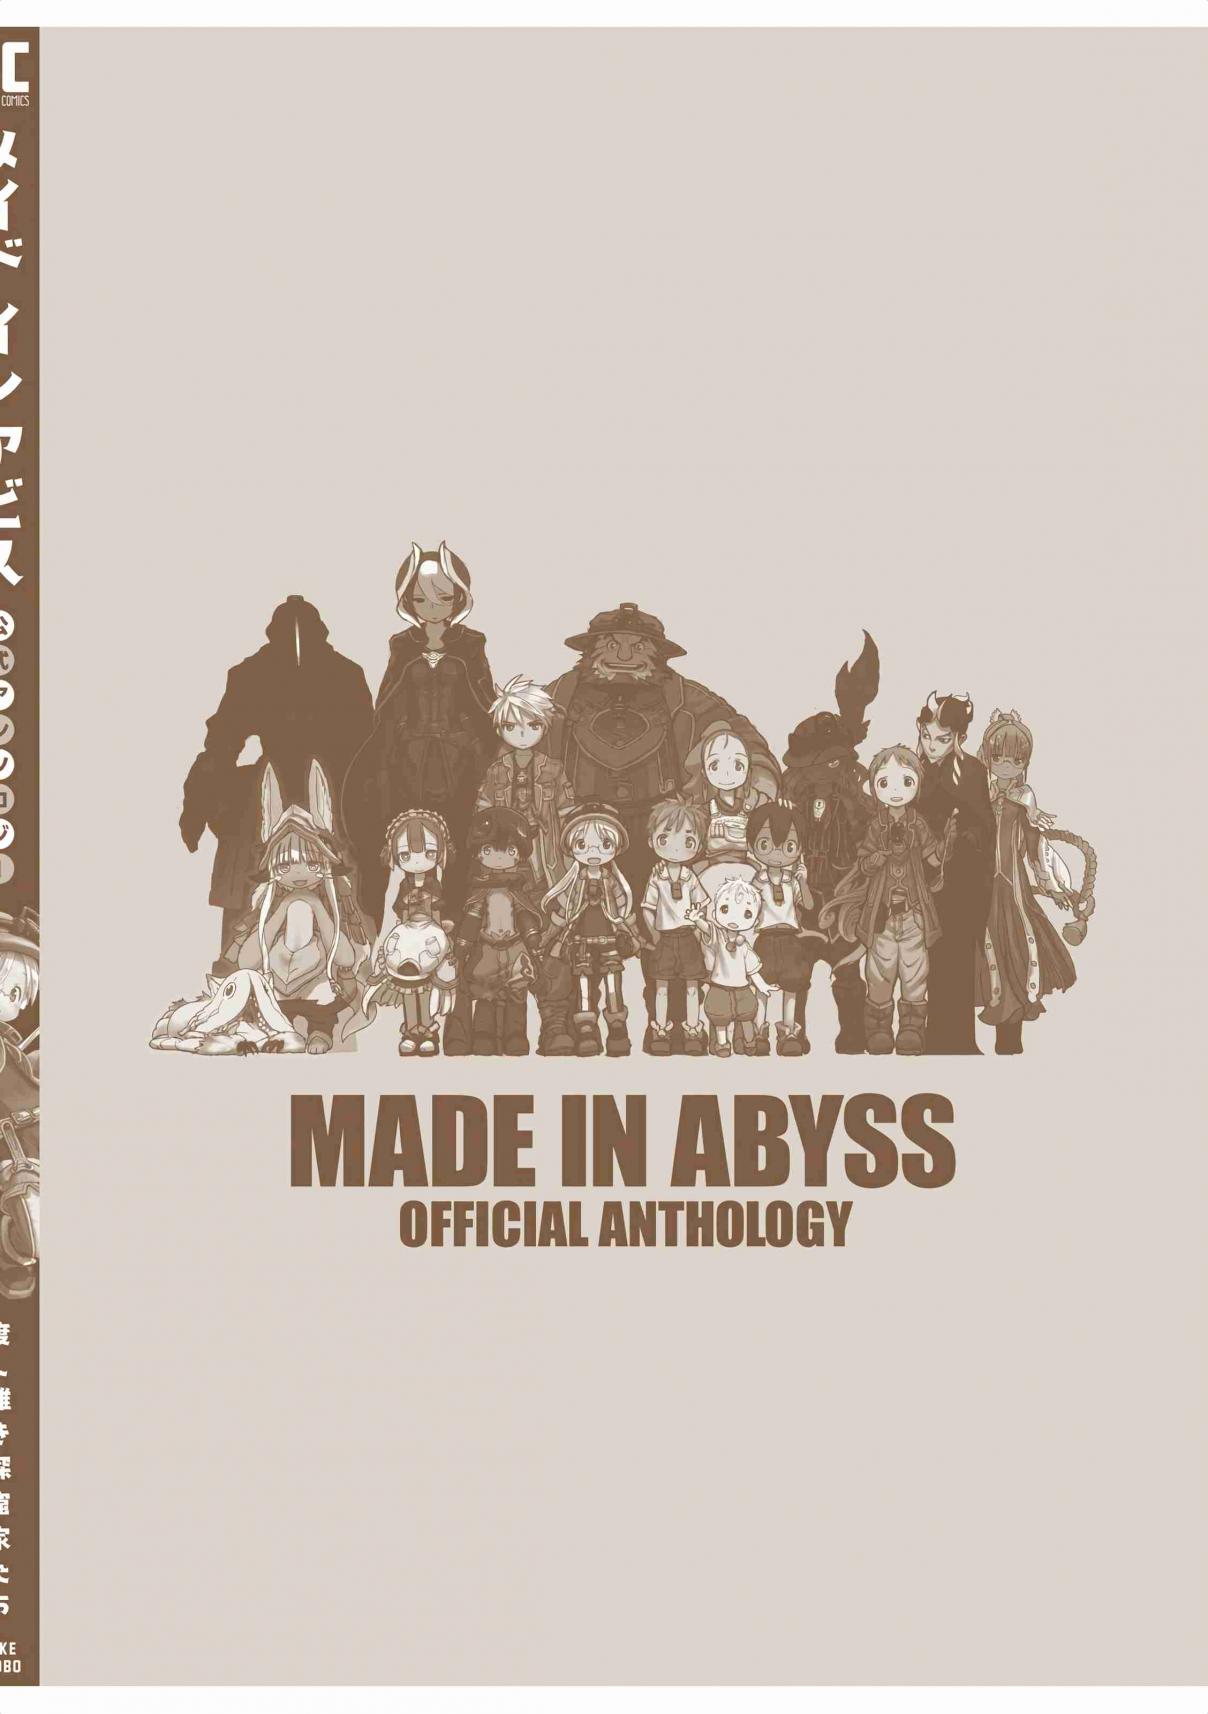 Made in Abyss Official Anthology Vol. 1 Ch. 16 Volume 1 Extras